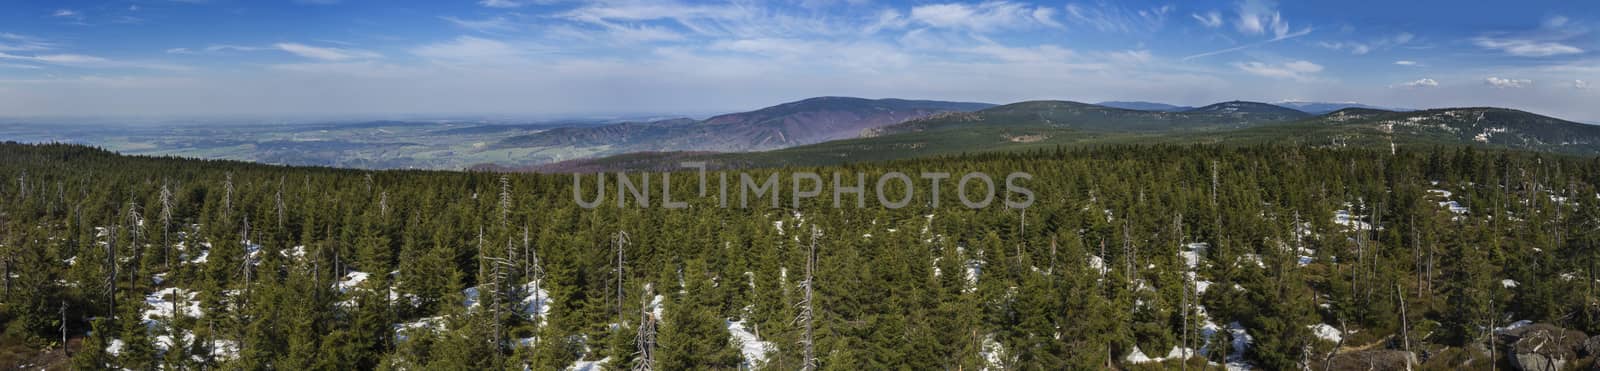 Jizera Mountains jizerske hory panoramic landscape, view from peak of holubnik mountain with lush green spruce forest, trees, boulders and blue sky background, springtime with snow remains by Henkeova